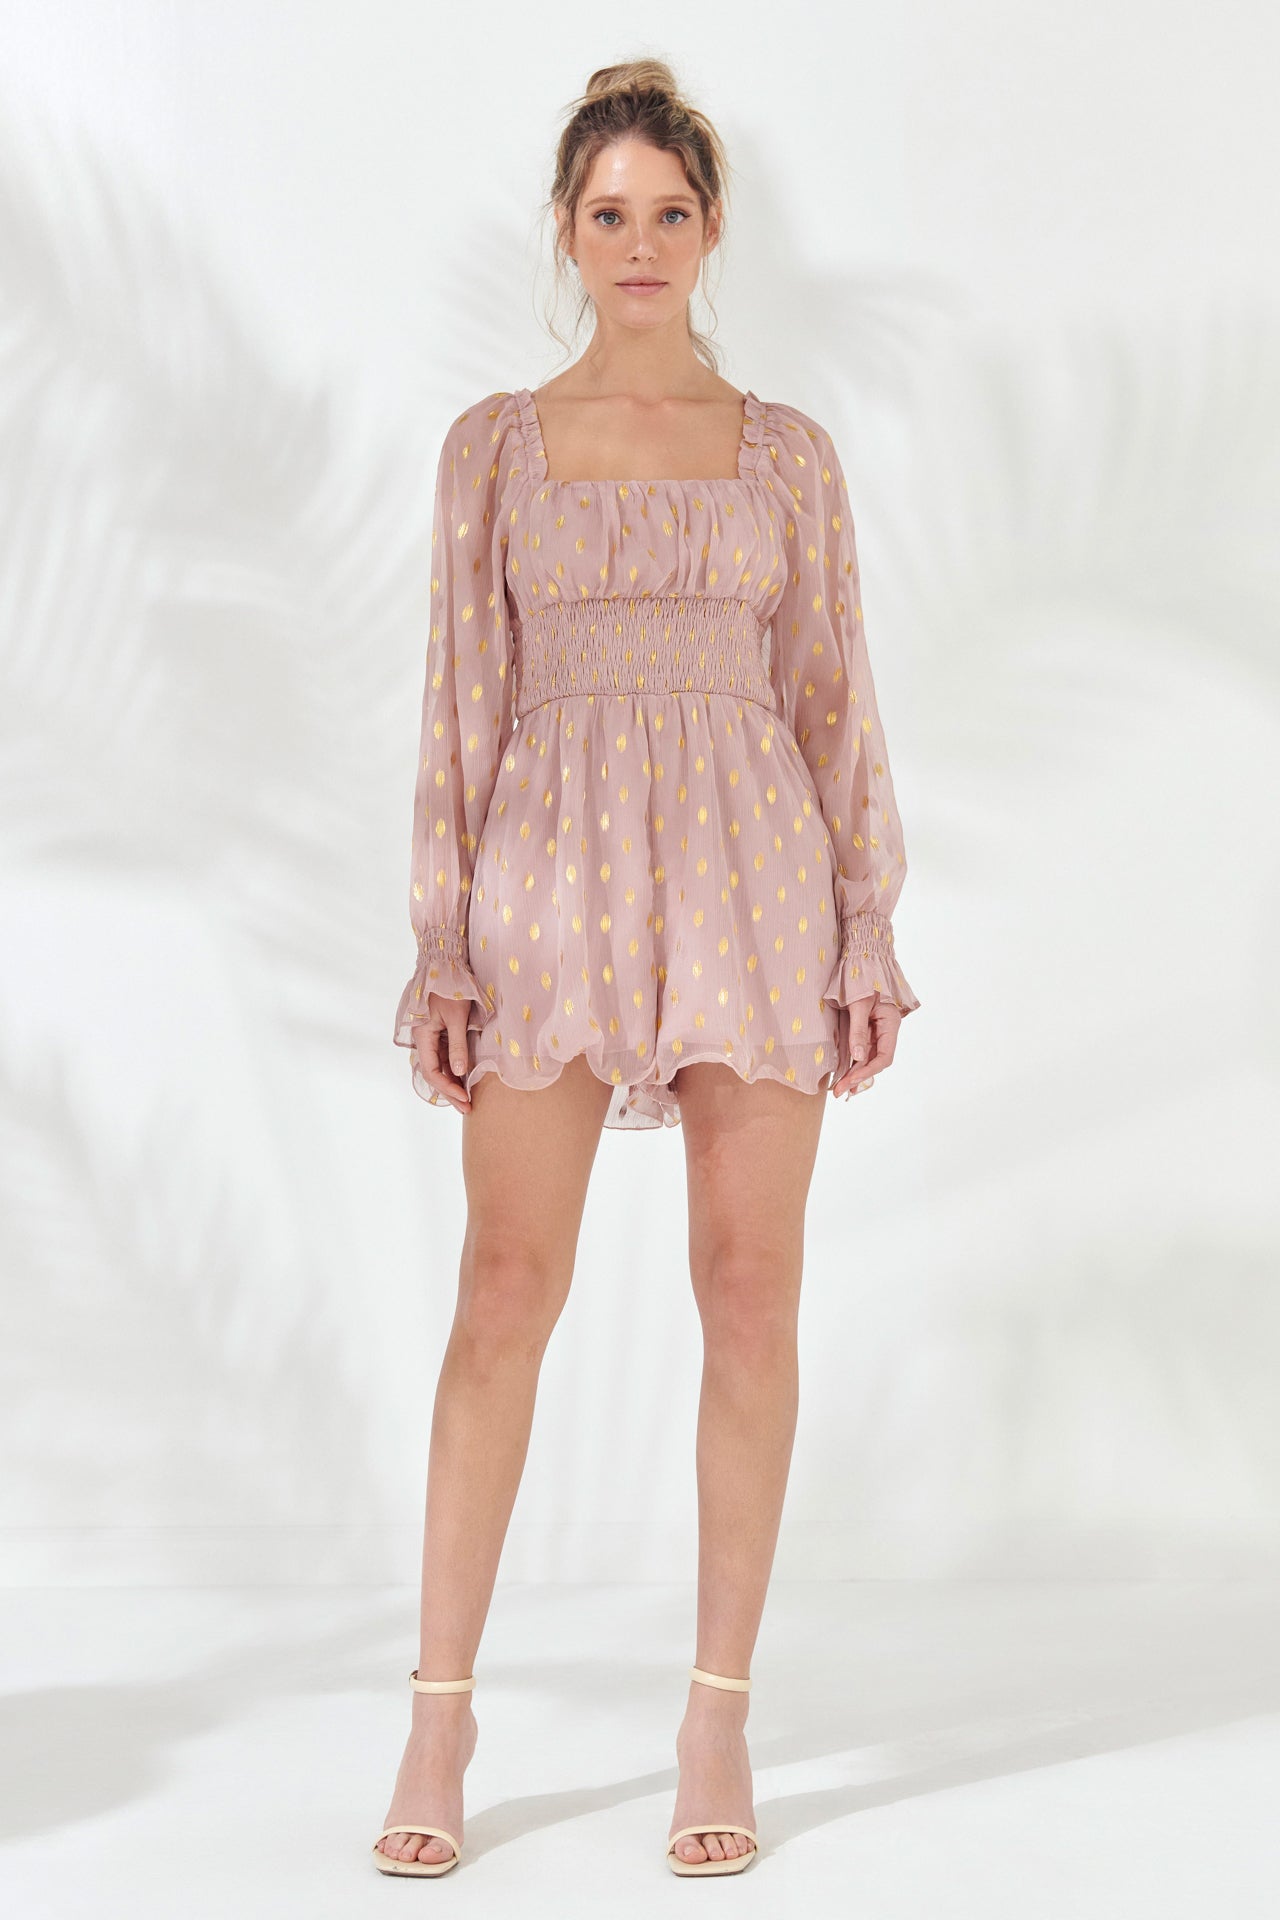 ENDLESS ROSE - Foiled Dot Long Sleeves Romper - ROMPERS available at Objectrare